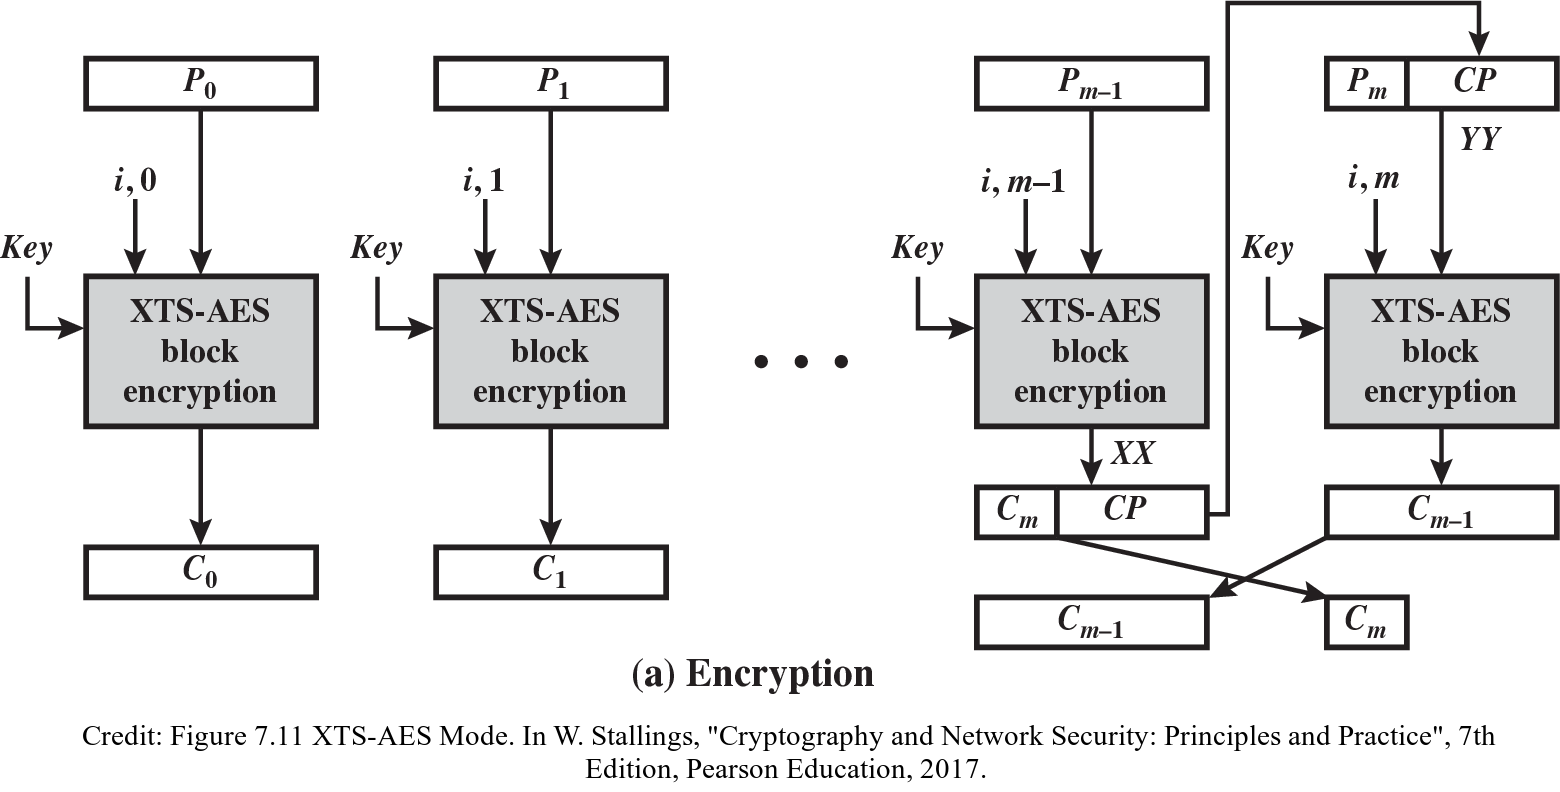 block cipher decryption tool aes to cbc